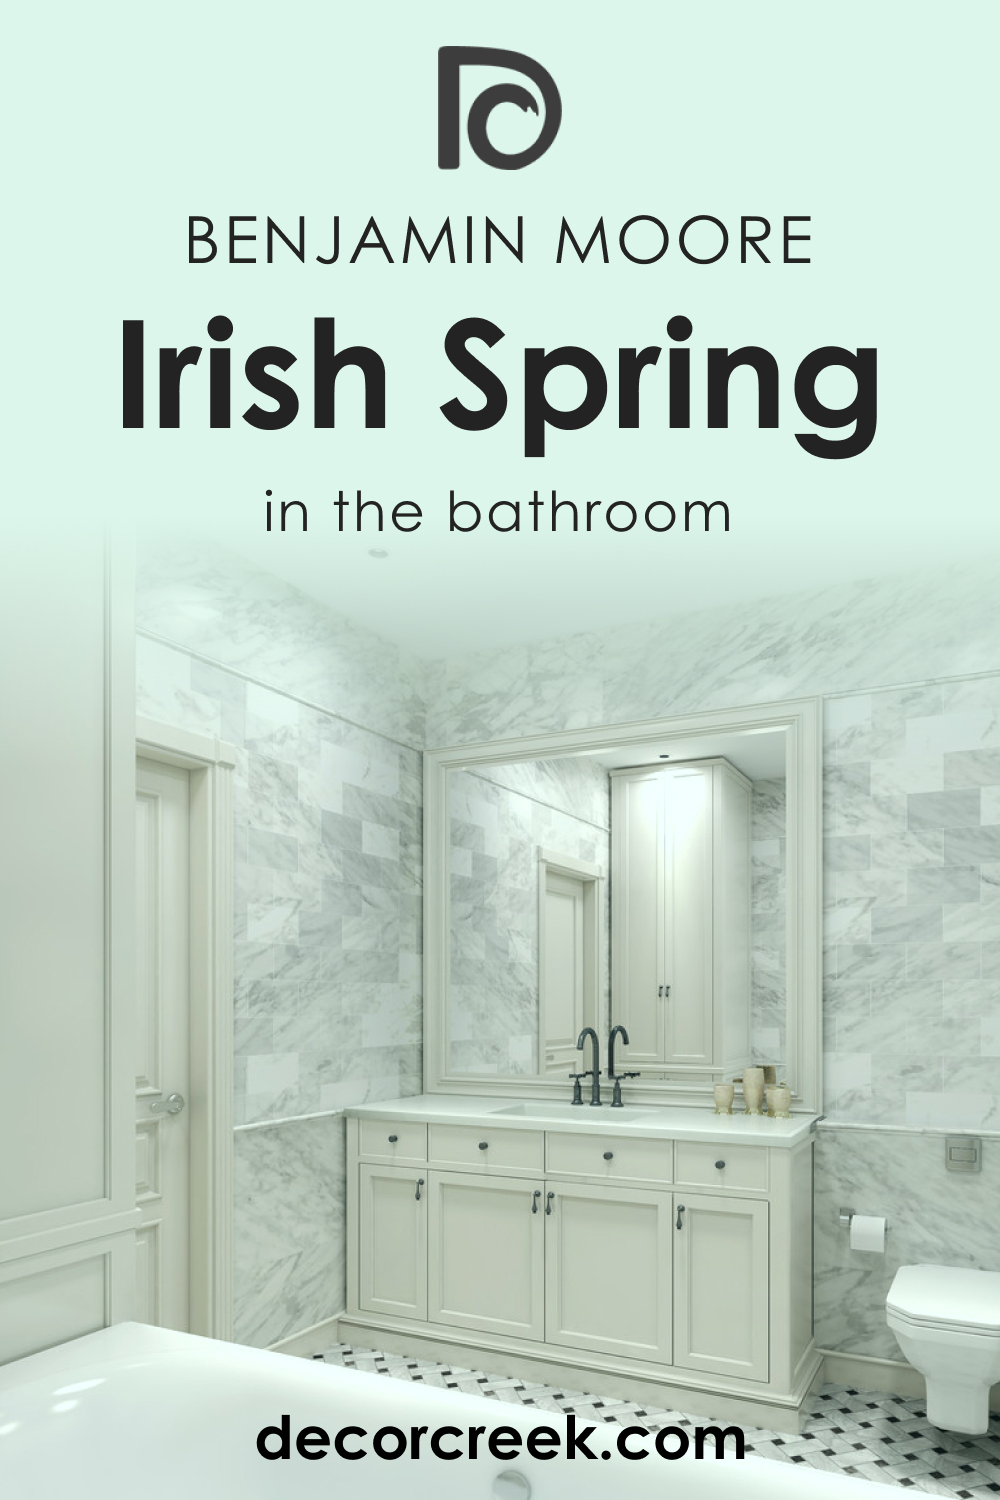 How to Use Irish Spring 2038-70 in the Bathroom